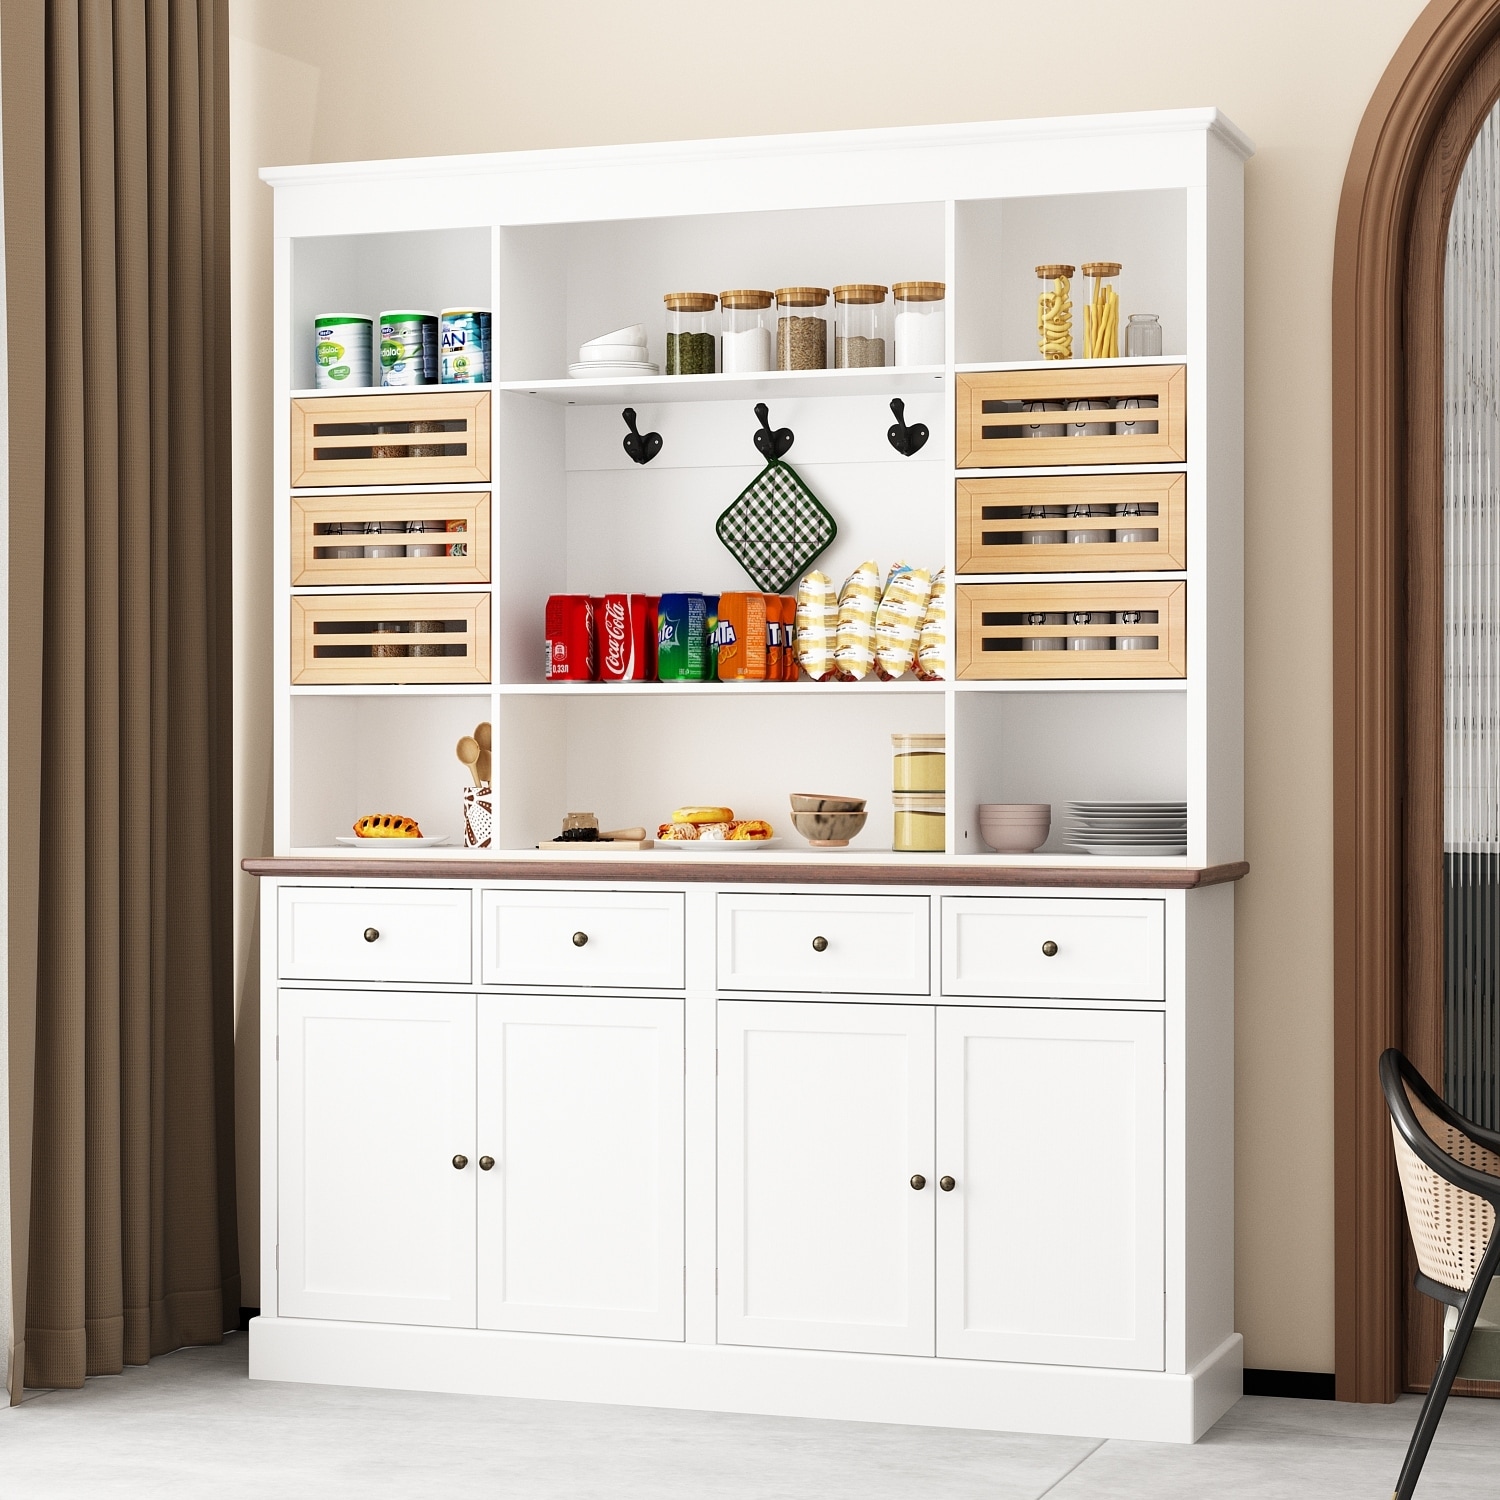 https://ak1.ostkcdn.com/images/products/is/images/direct/89c8c2050c63130f1e395a49e751017639686711/Kitchen-Storage%3A-10-Drawer-Pantry-Cabinet-with-Hanging-Hooks-Buffet.jpg